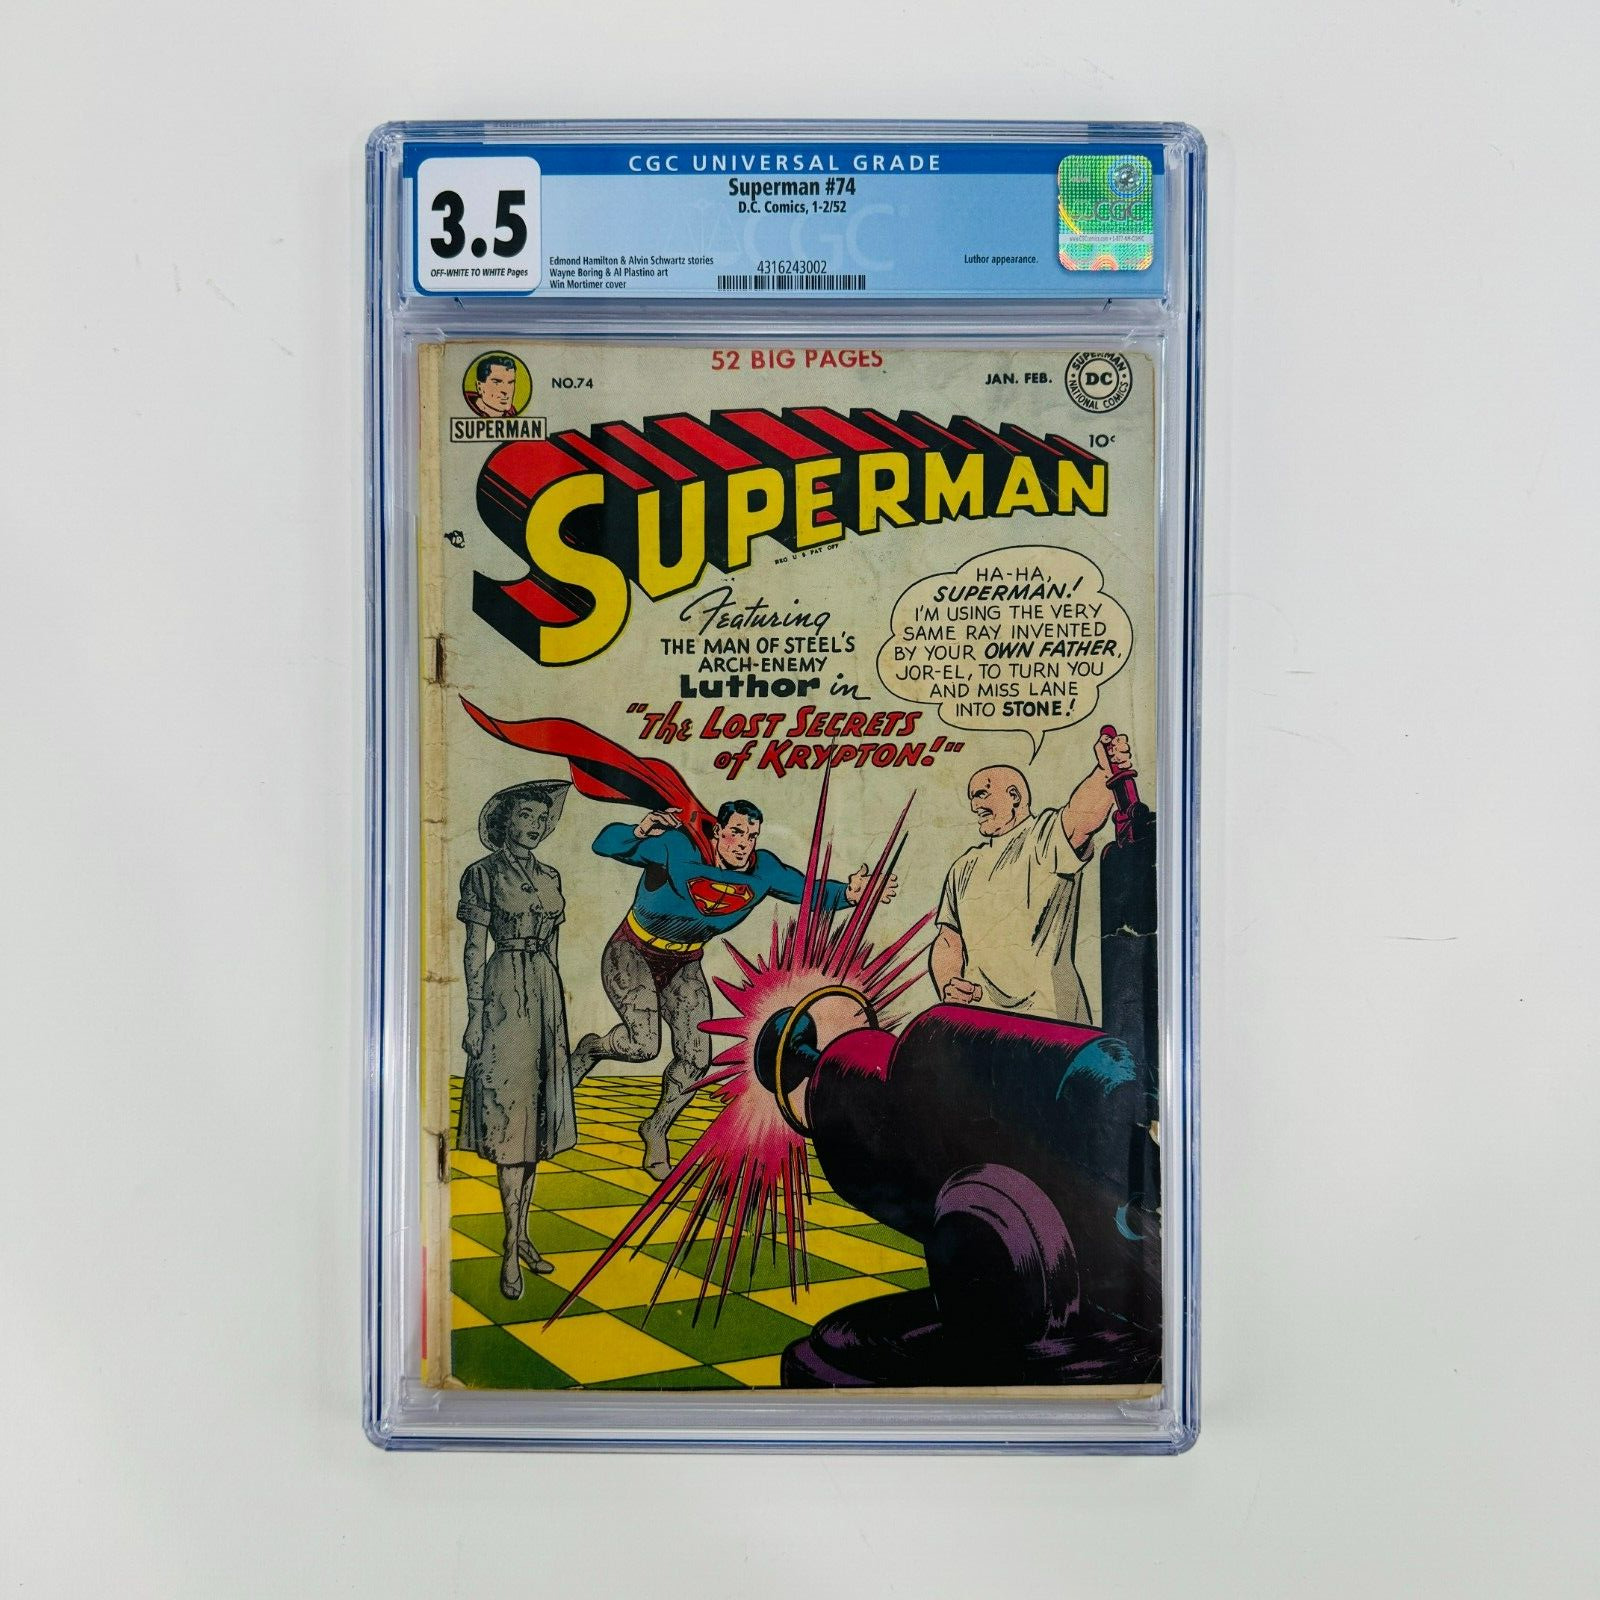 Superman #74 - DC Comics DCU 1-2/1952 Luther  Off-White to White Pages CGC 3.5